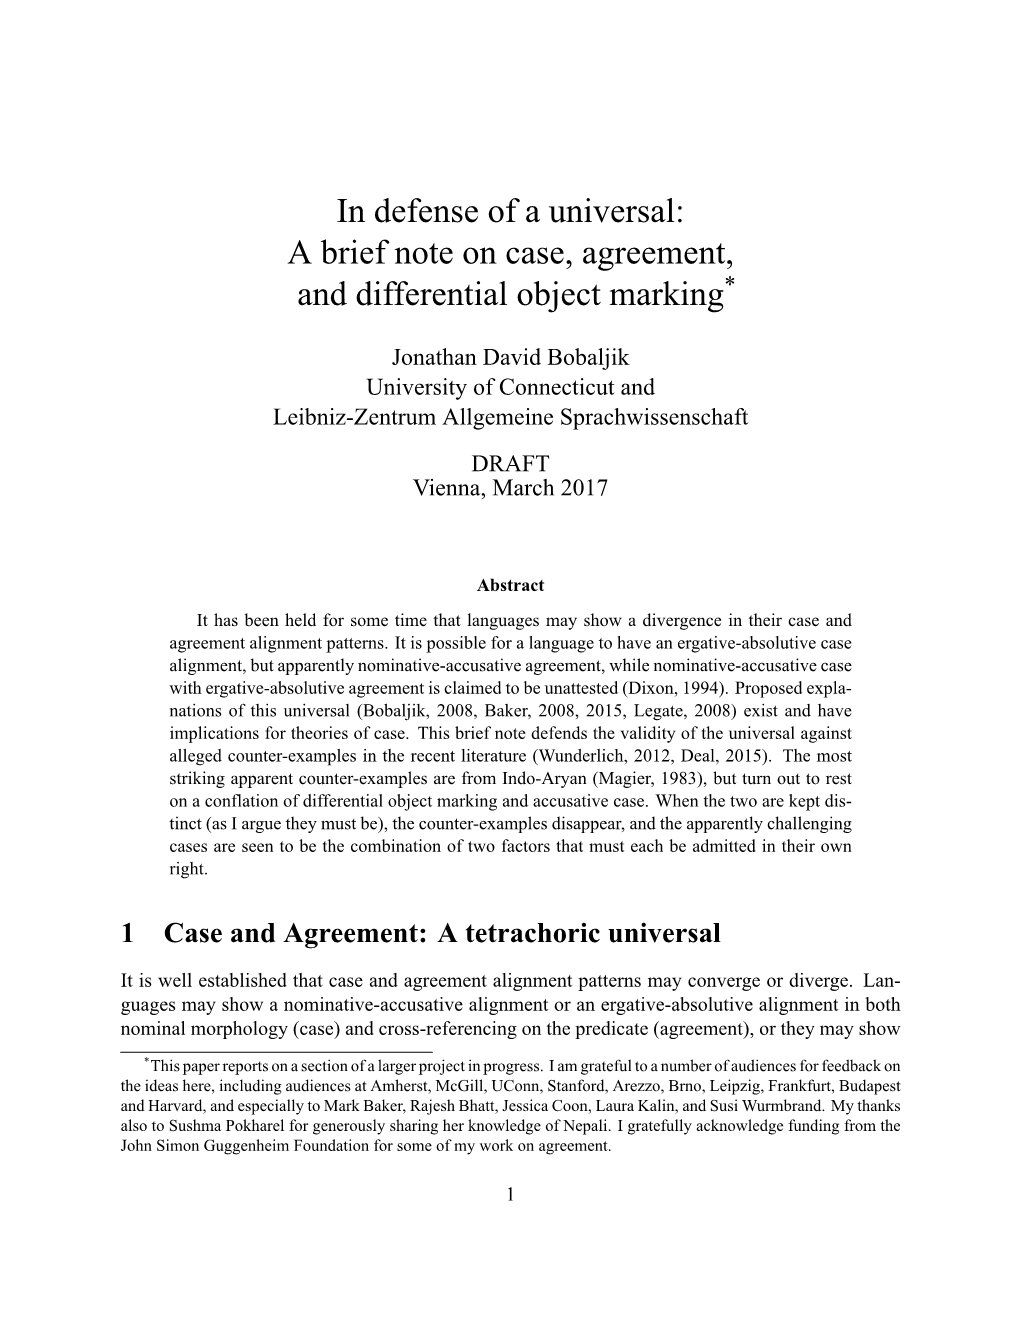 A Brief Note on Case, Agreement, and Differential Object Marking*